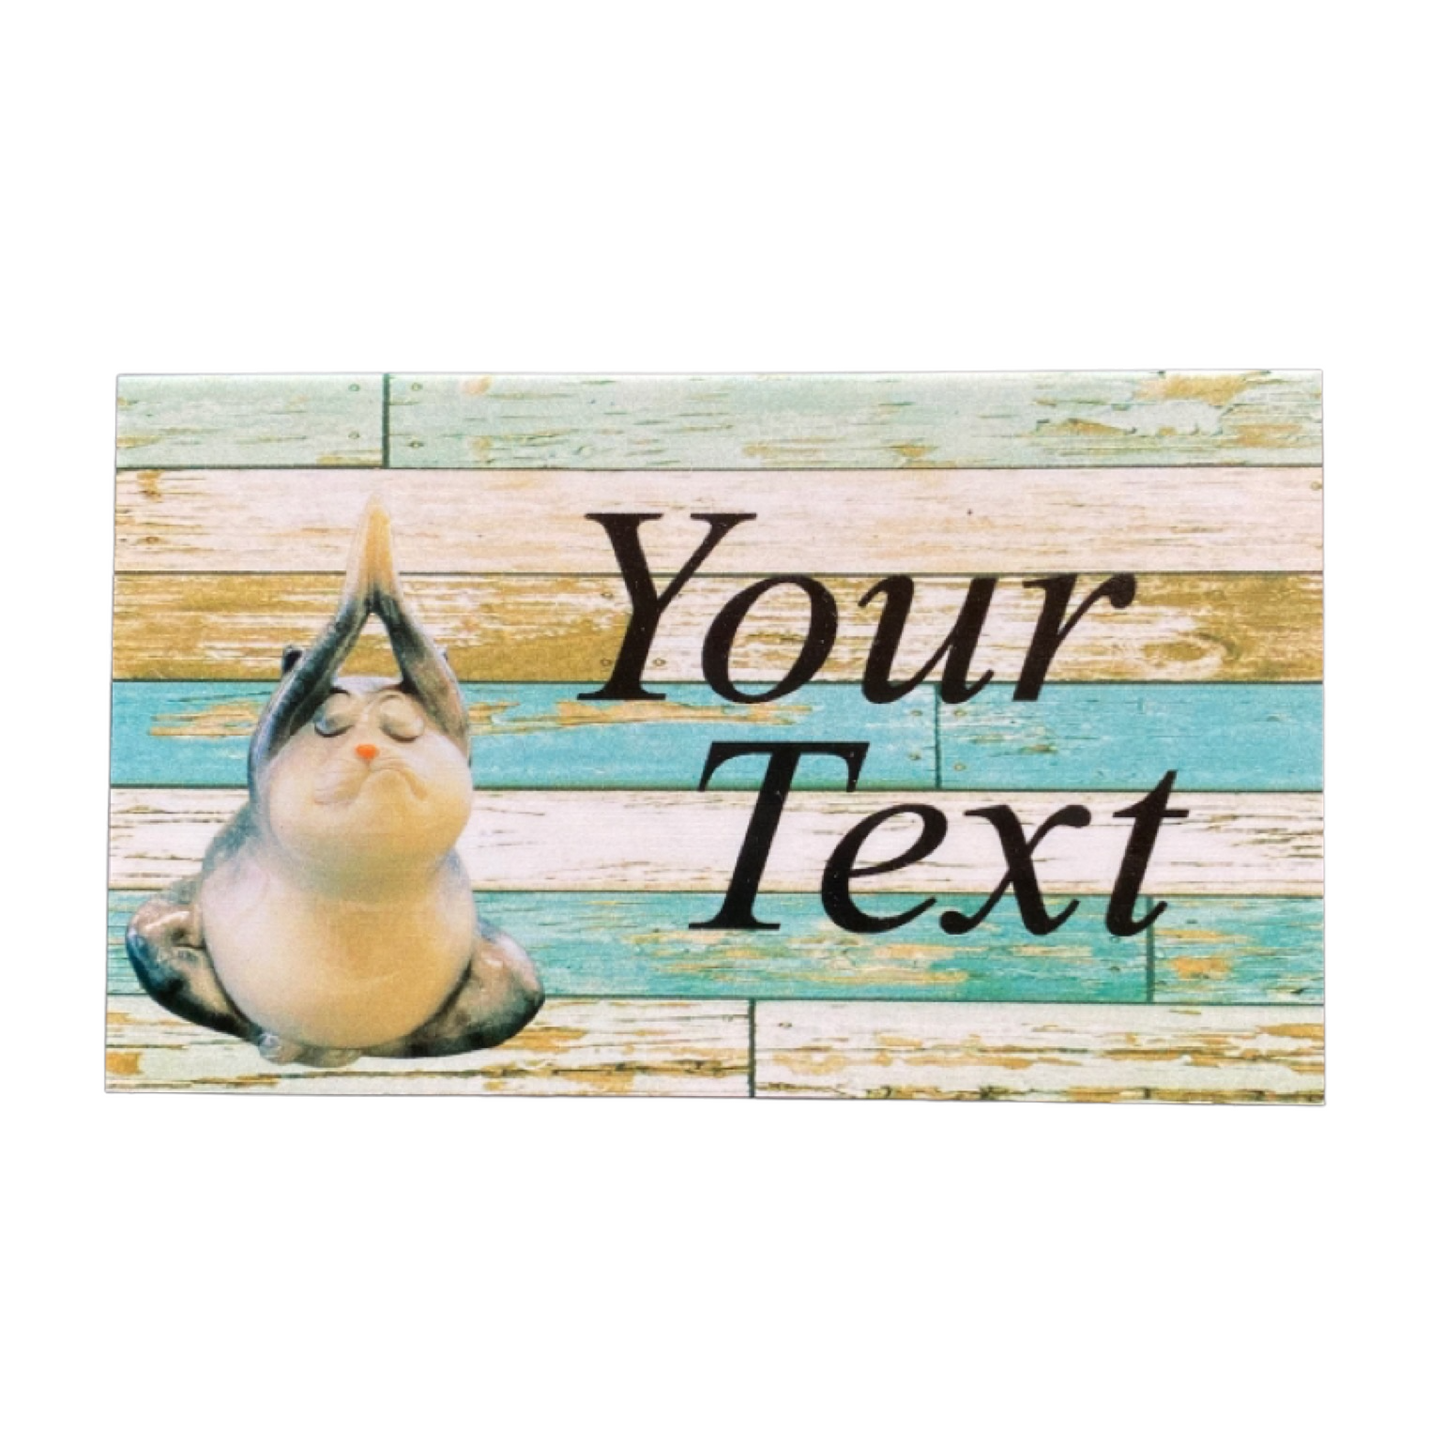 Cat Yoga Meditate Zen Custom Persoanlised Sign - The Renmy Store Homewares & Gifts 